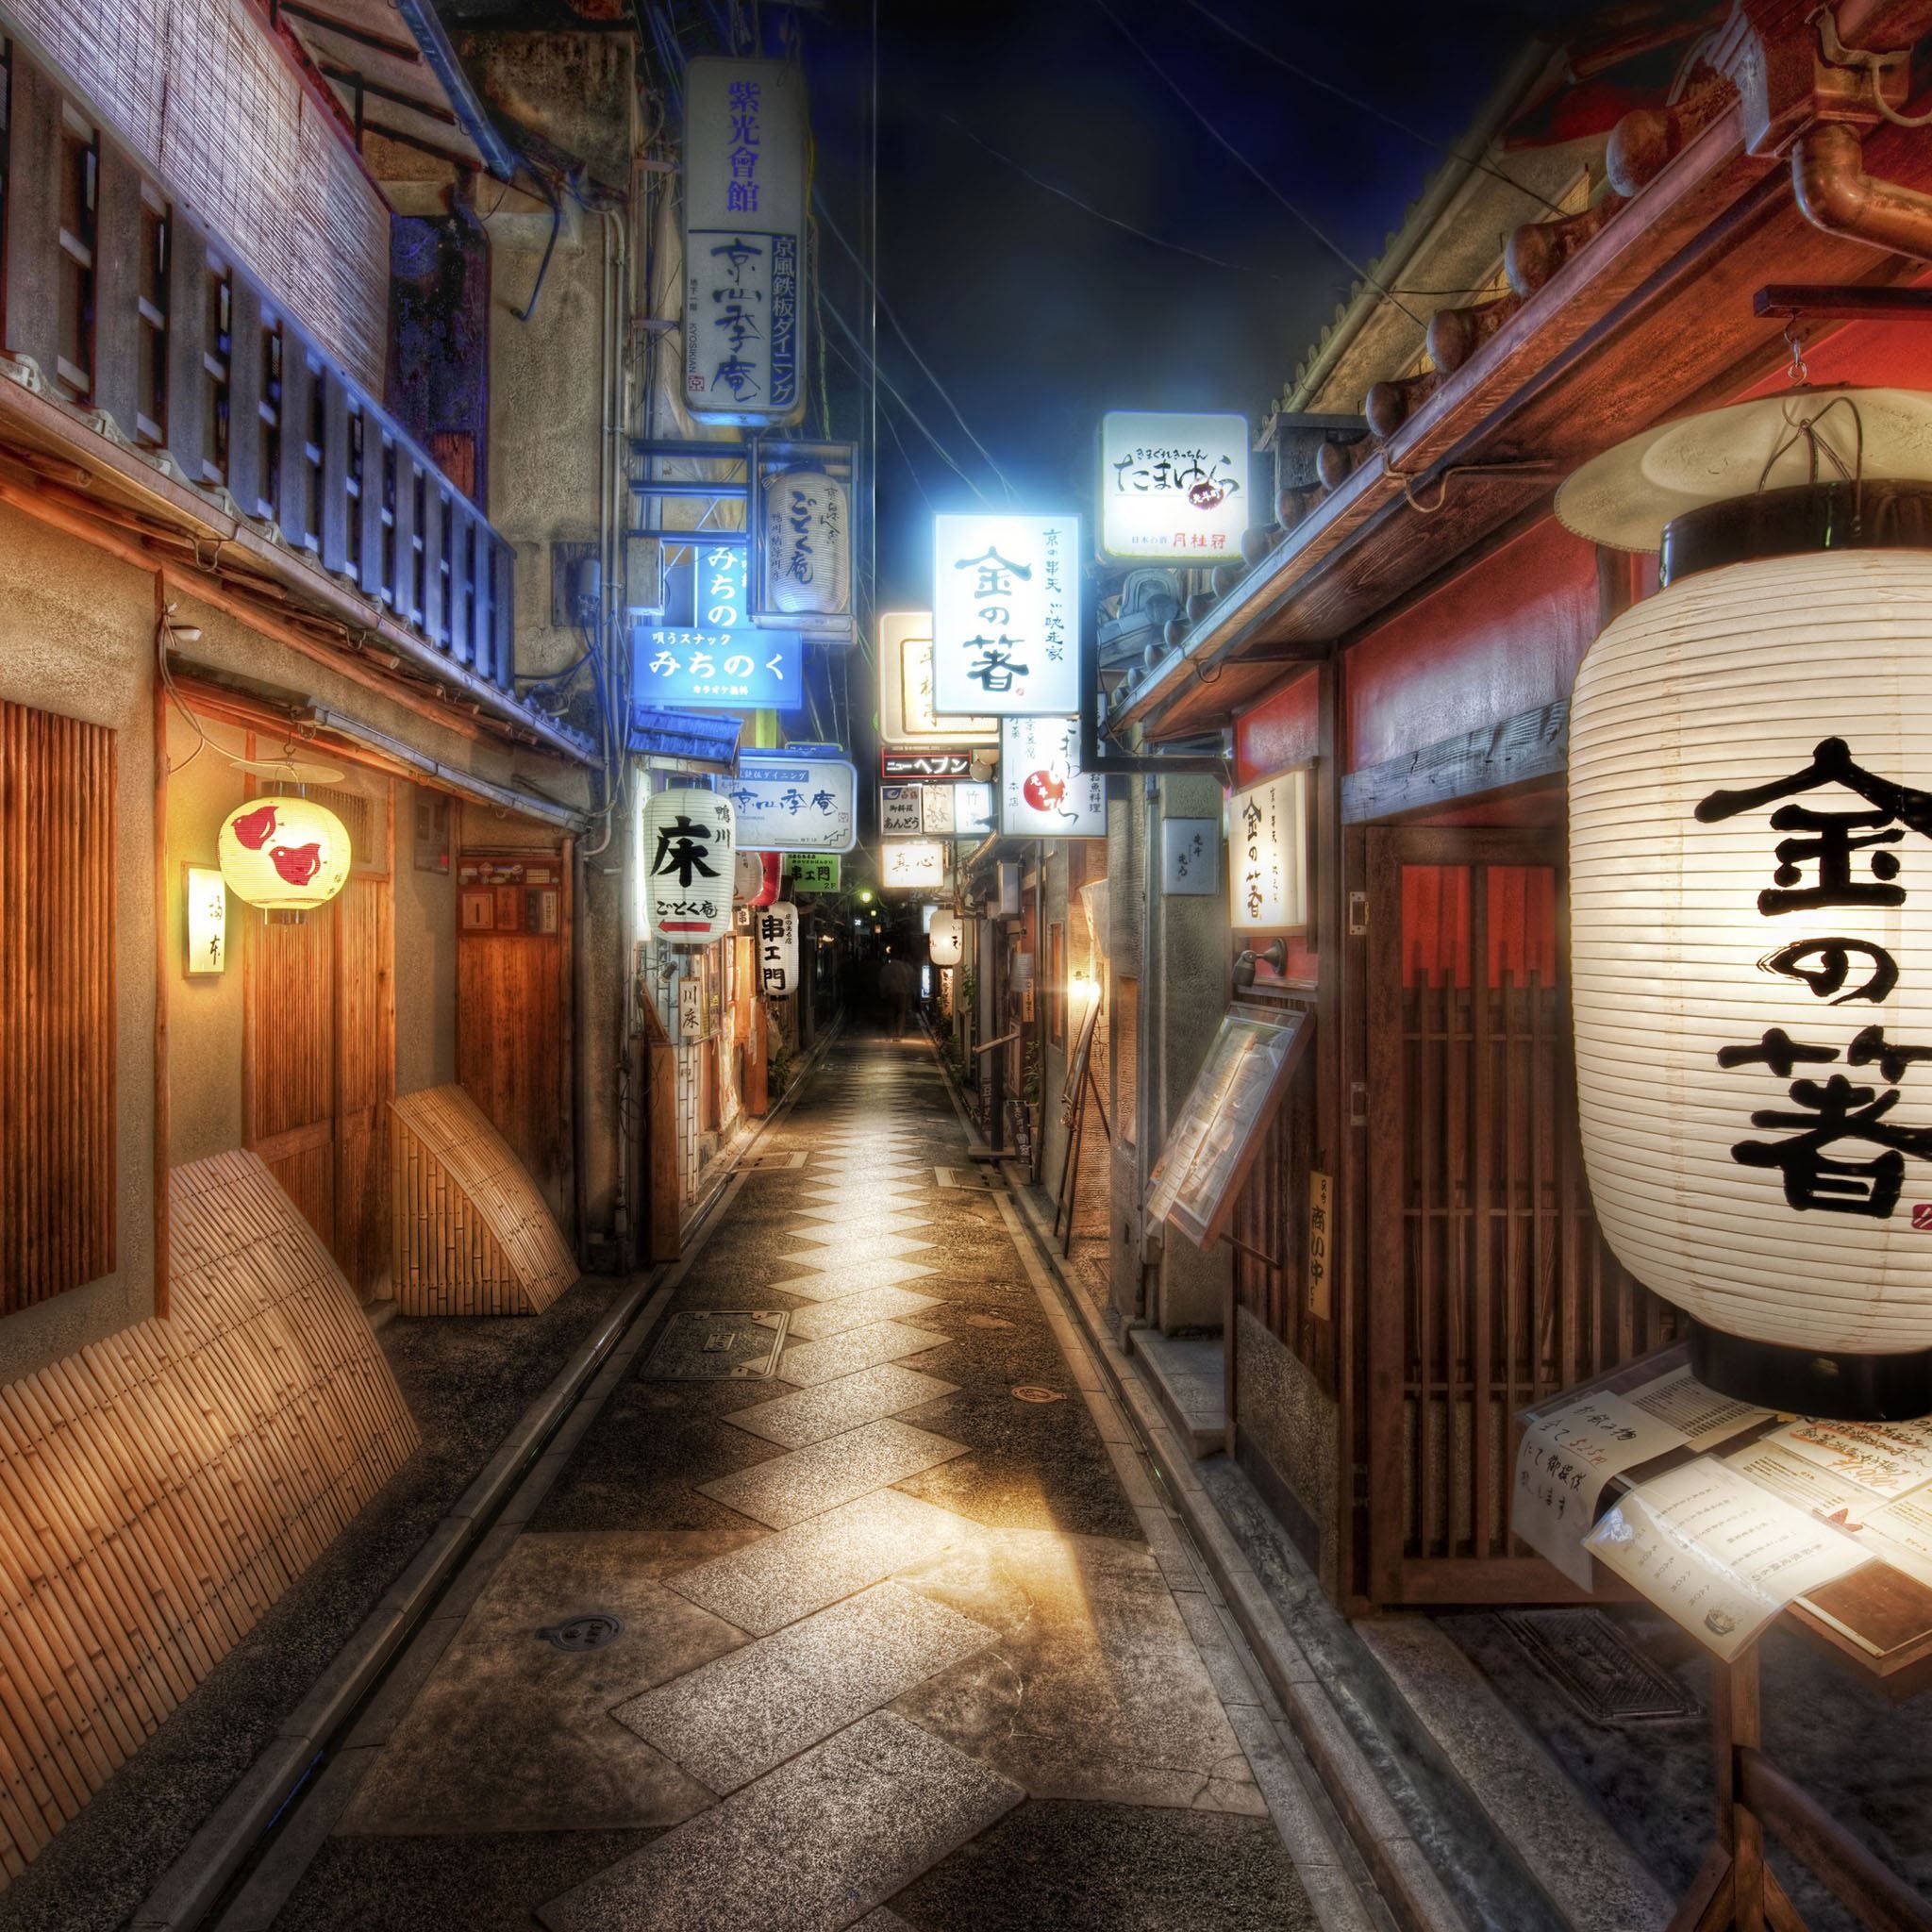 A narrow alleyway with lanterns and signs in Japanese. - Japan